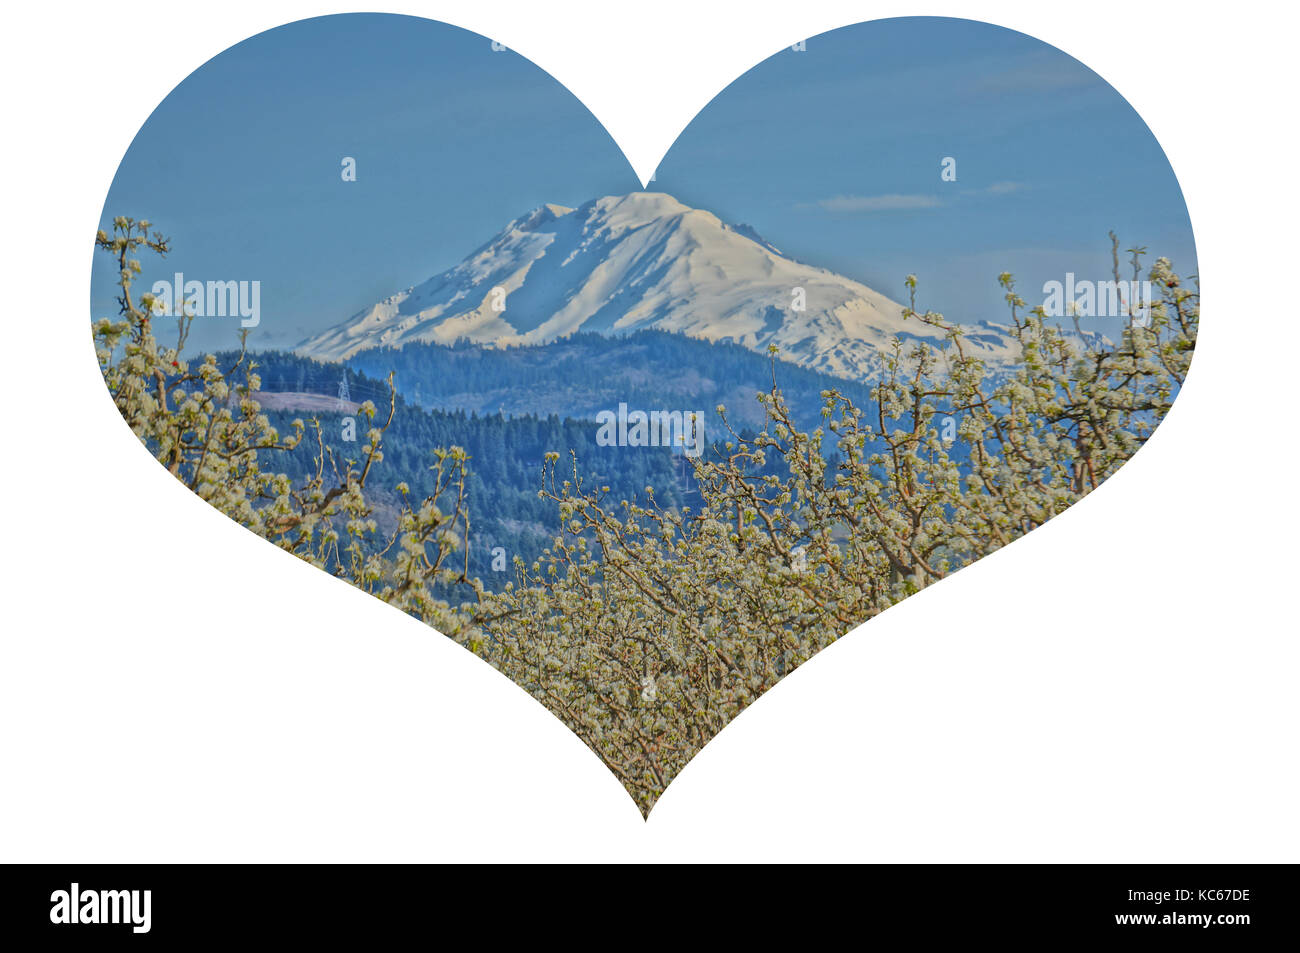 Heart shape cutout of Mount Adams, Washington in the background and a cherry orchard in the foreground. Stock Photo